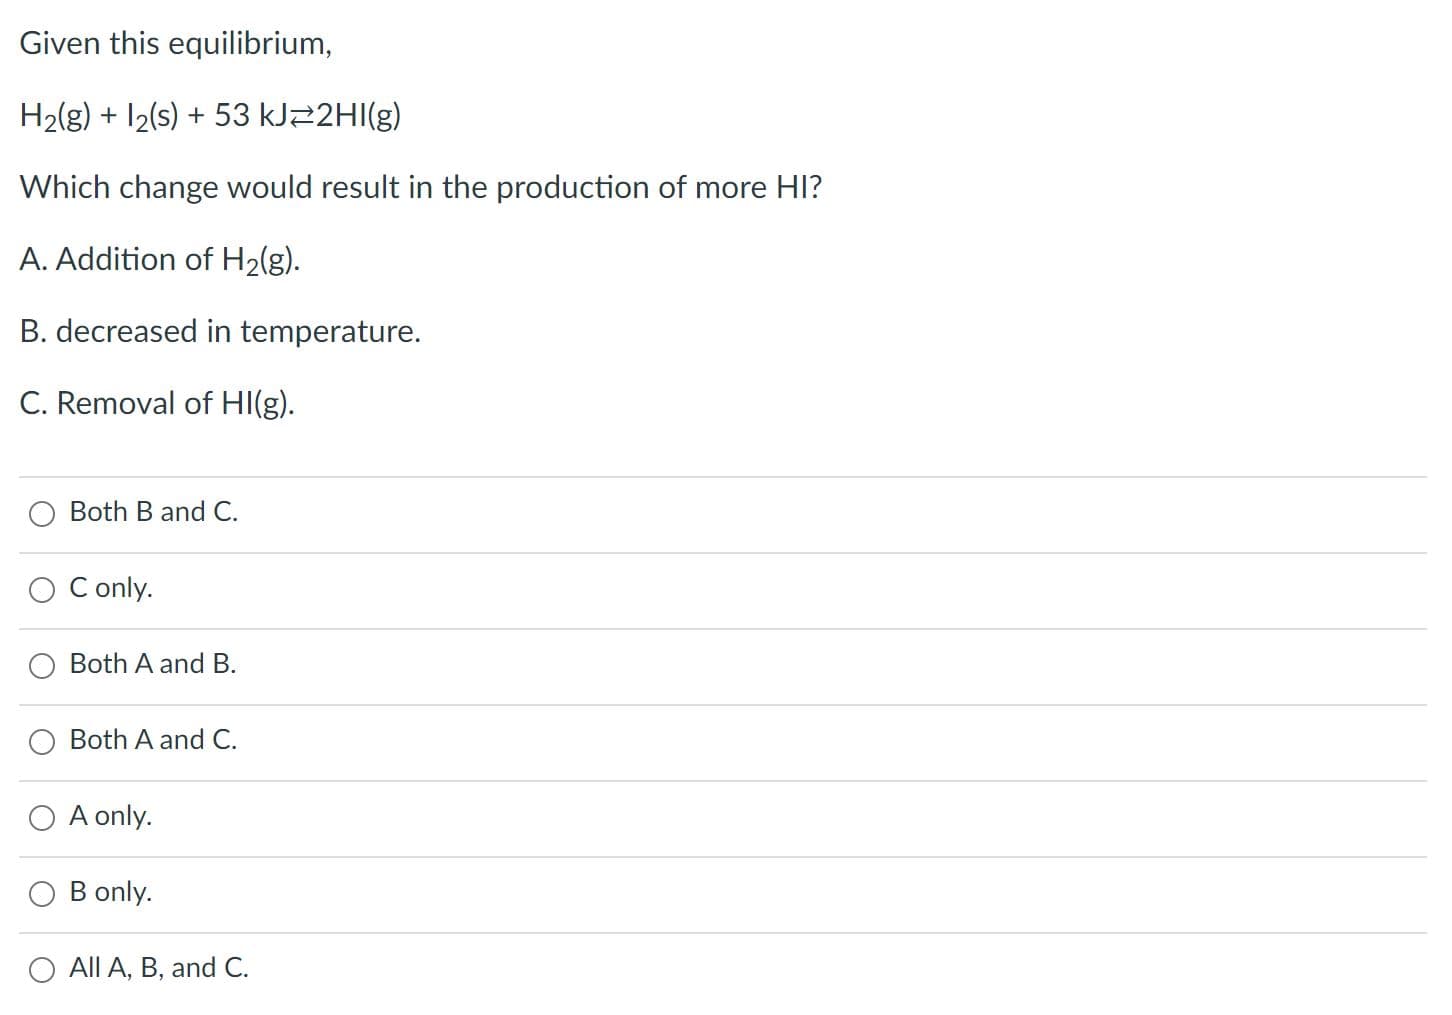 Given this equilibrium,
H2(g) + I2(s) + 53 KJ22HI(g)
Which change would result in the production of more HI?
A. Addition of H2(g).
B. decreased in temperature.
C. Removal of HI(g).
Both B and C.
C only.
Both A and B.
Both A and C.
O A only.
B only.
All A, B, and C.
